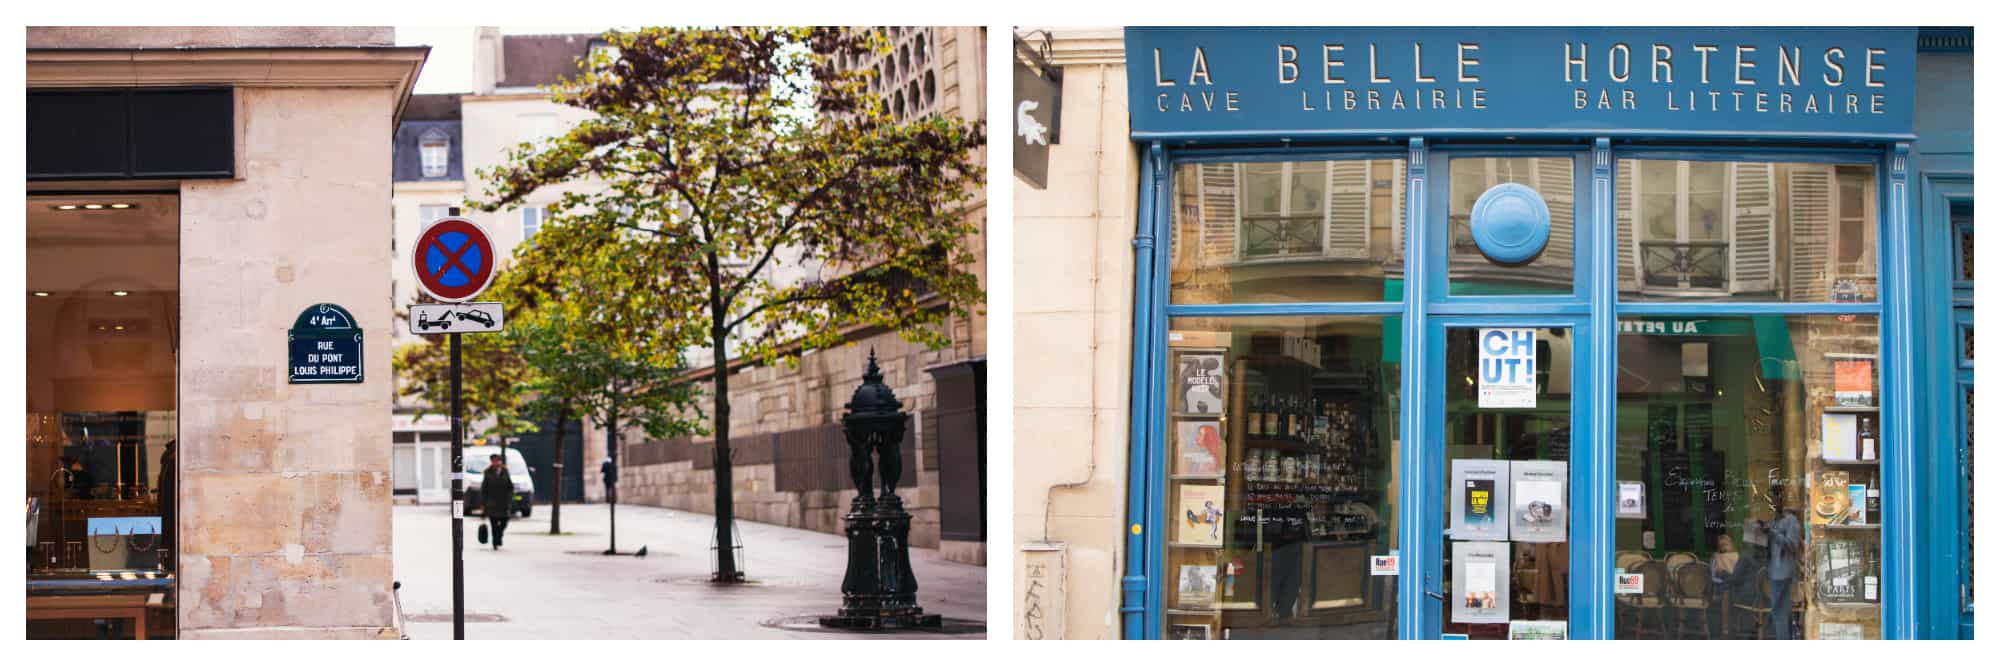 On left: A peaceful, sunny day on rue du Pont Louis Philippe in Paris' 4th arrondissement. On right: The wine bar La Belle Hortense is a wine cave, bookshop, and literary ball rolled into one, and a popular spot for an apéritif. 